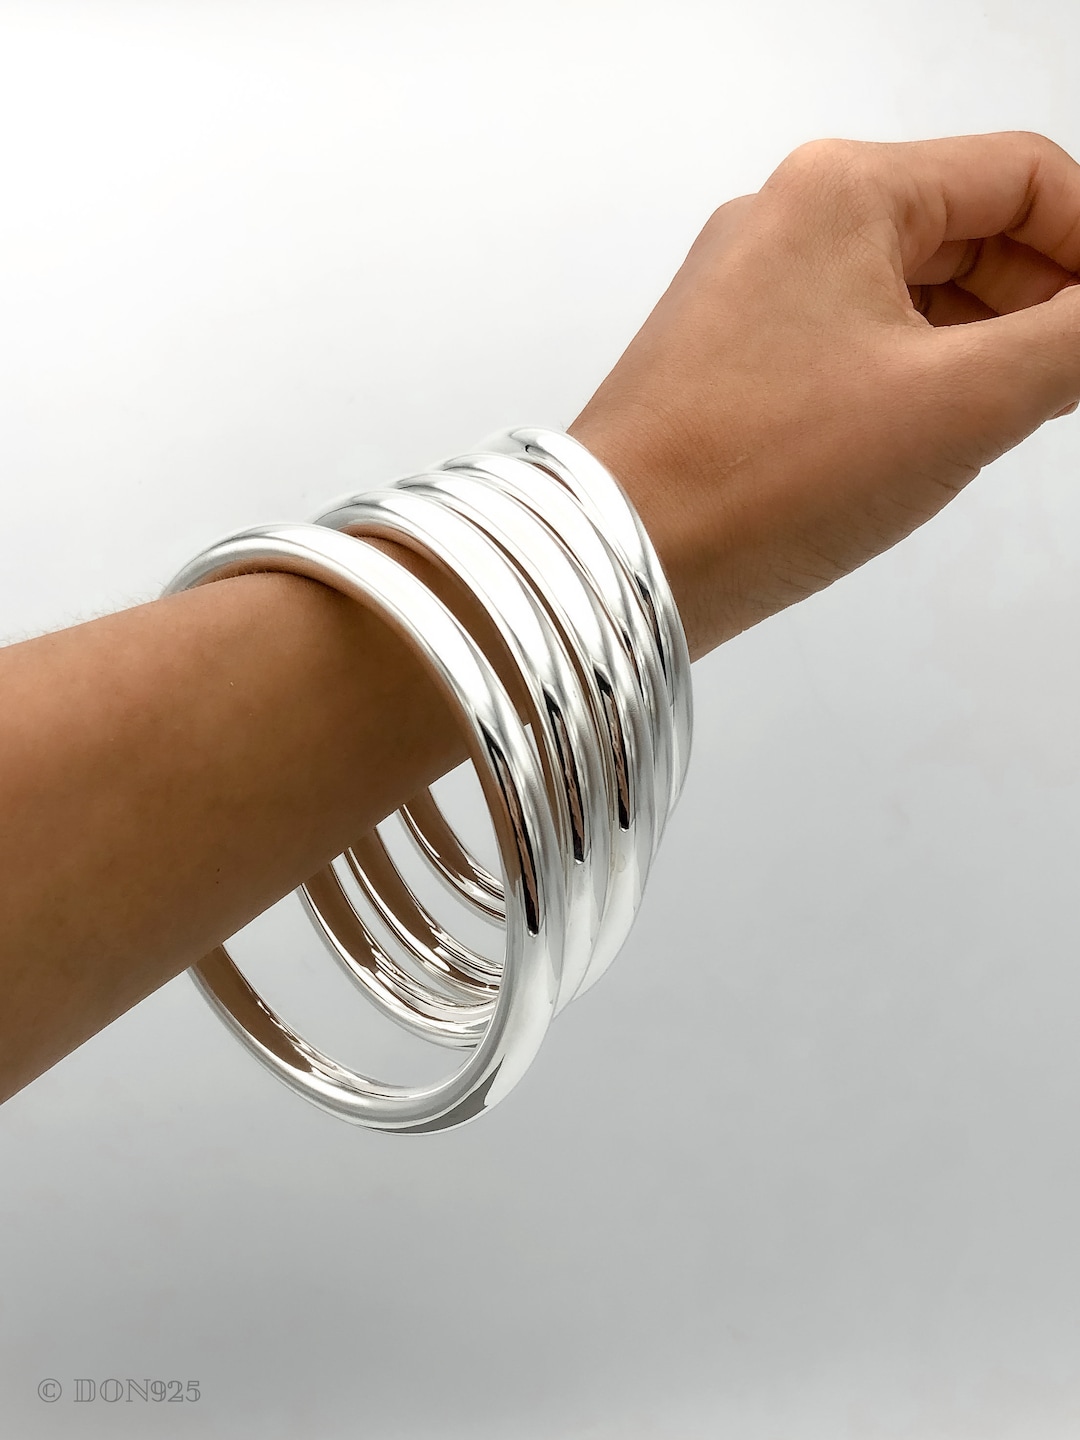 Thin V Shape Silver Cuff Bracelet - 925 Sterling Silver , Fits Size 6 to 7 inch Wrist